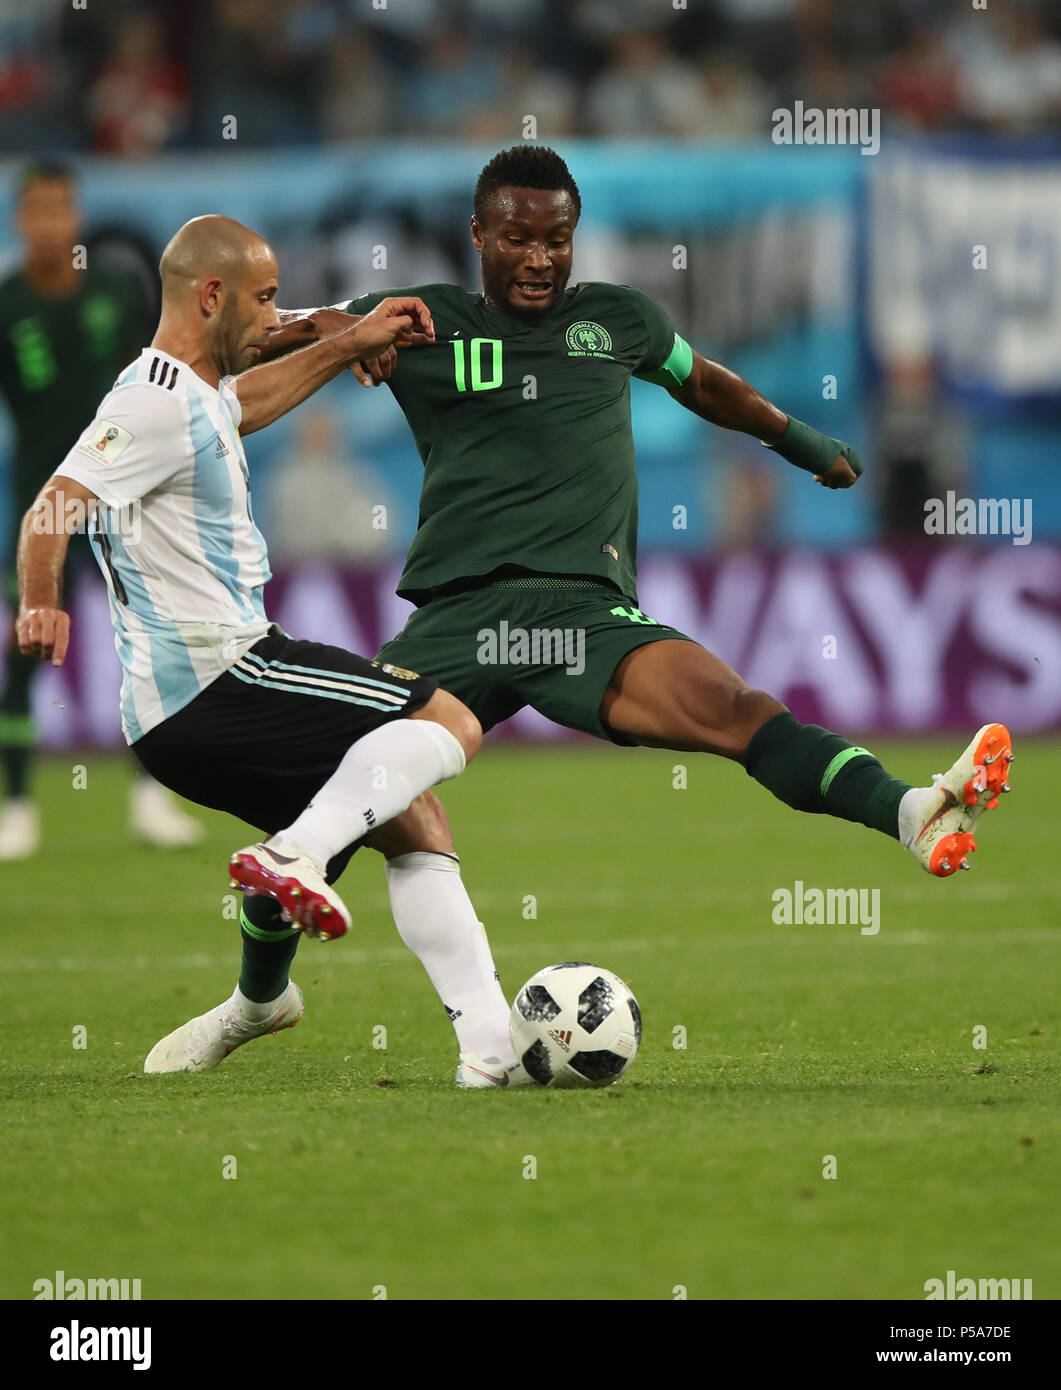 Saint Petersburg, Russia. 26th June, 2018. John Obi Mikel (R) of Nigeria vies with Javier Mascherano of Argentina during the 2018 FIFA World Cup Group D match between Nigeria and Argentina in Saint Petersburg, Russia, June 26, 2018. Credit: Wu Zhuang/Xinhua/Alamy Live News Stock Photo